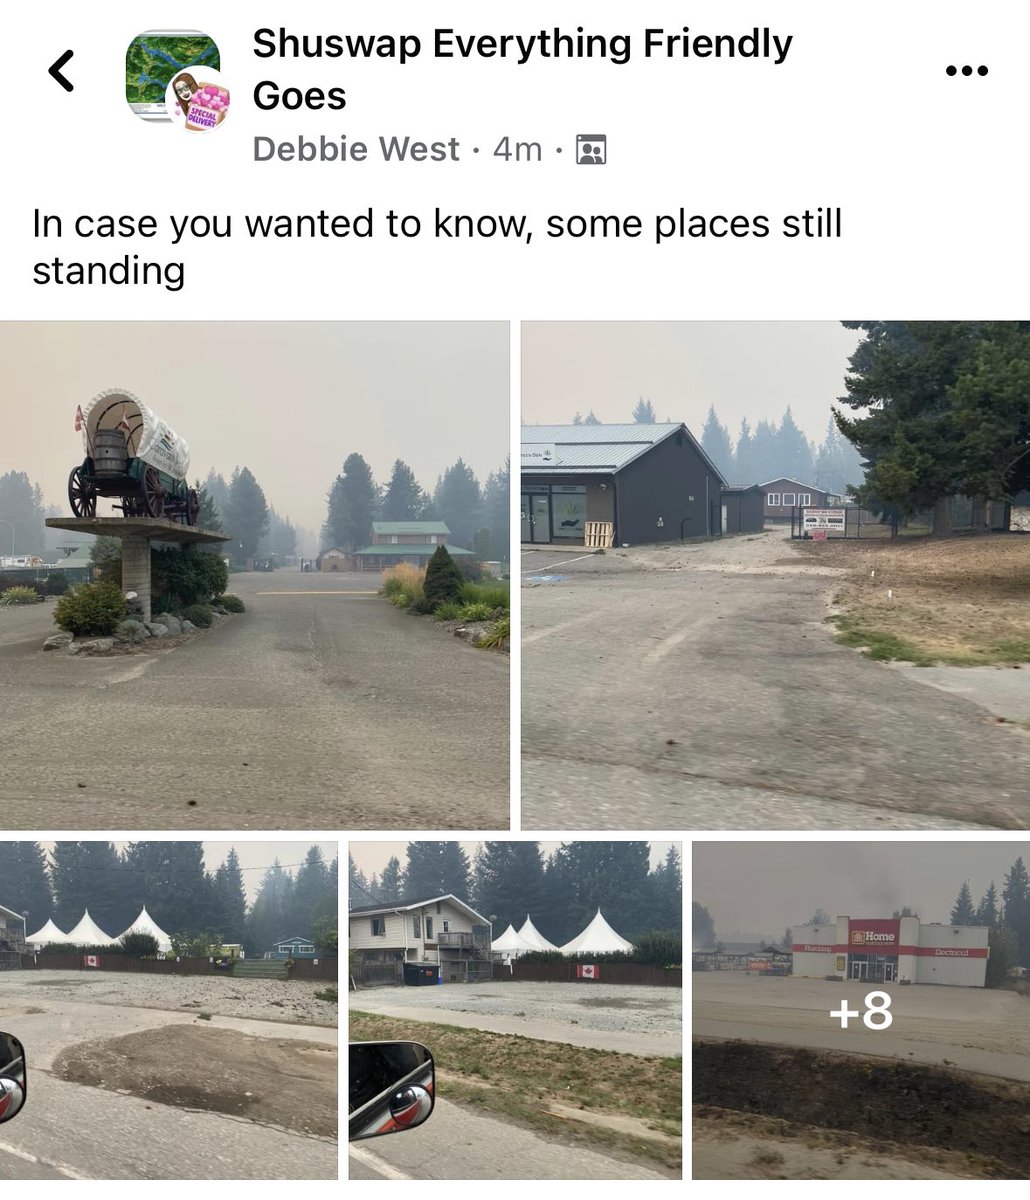 Maybe some hopeful news for parts of Scotch Creek this morning! #adamslakefire #ScotchCreek #Adamslake #ShuswapLake